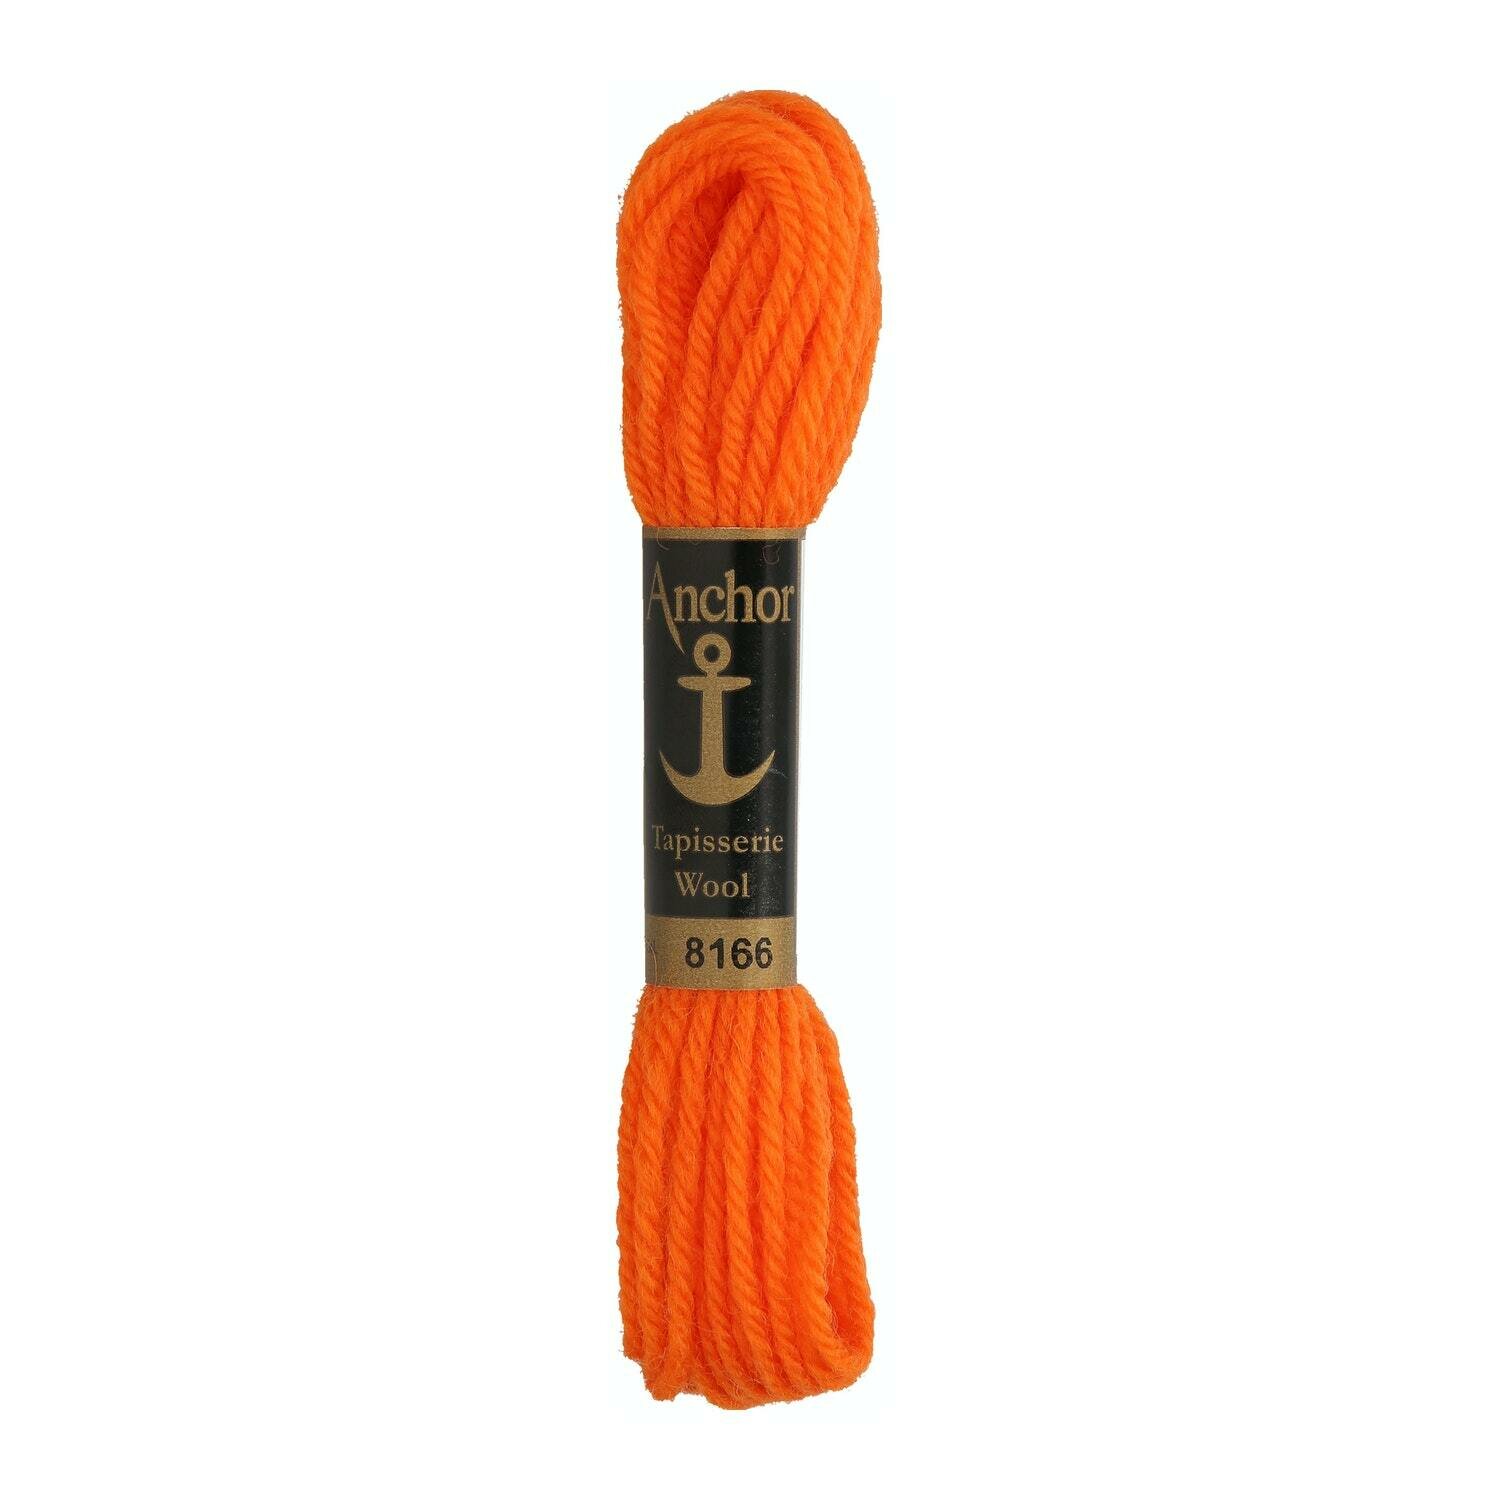 Anchor Tapisserie Wool #  08166